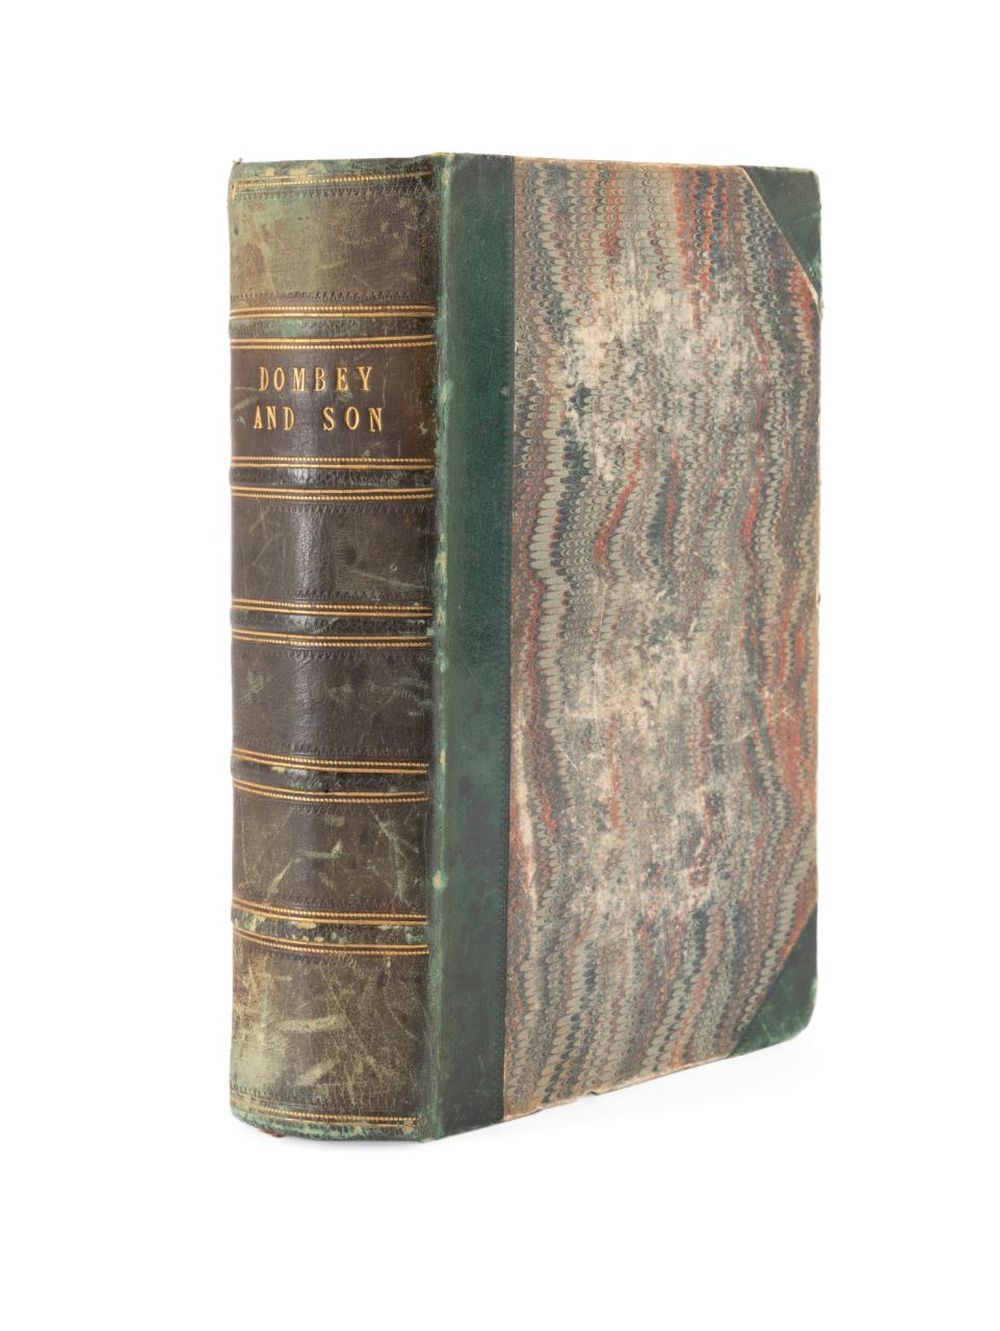 CHARLES DICKENS DOMBEY AND SON  3cd50f